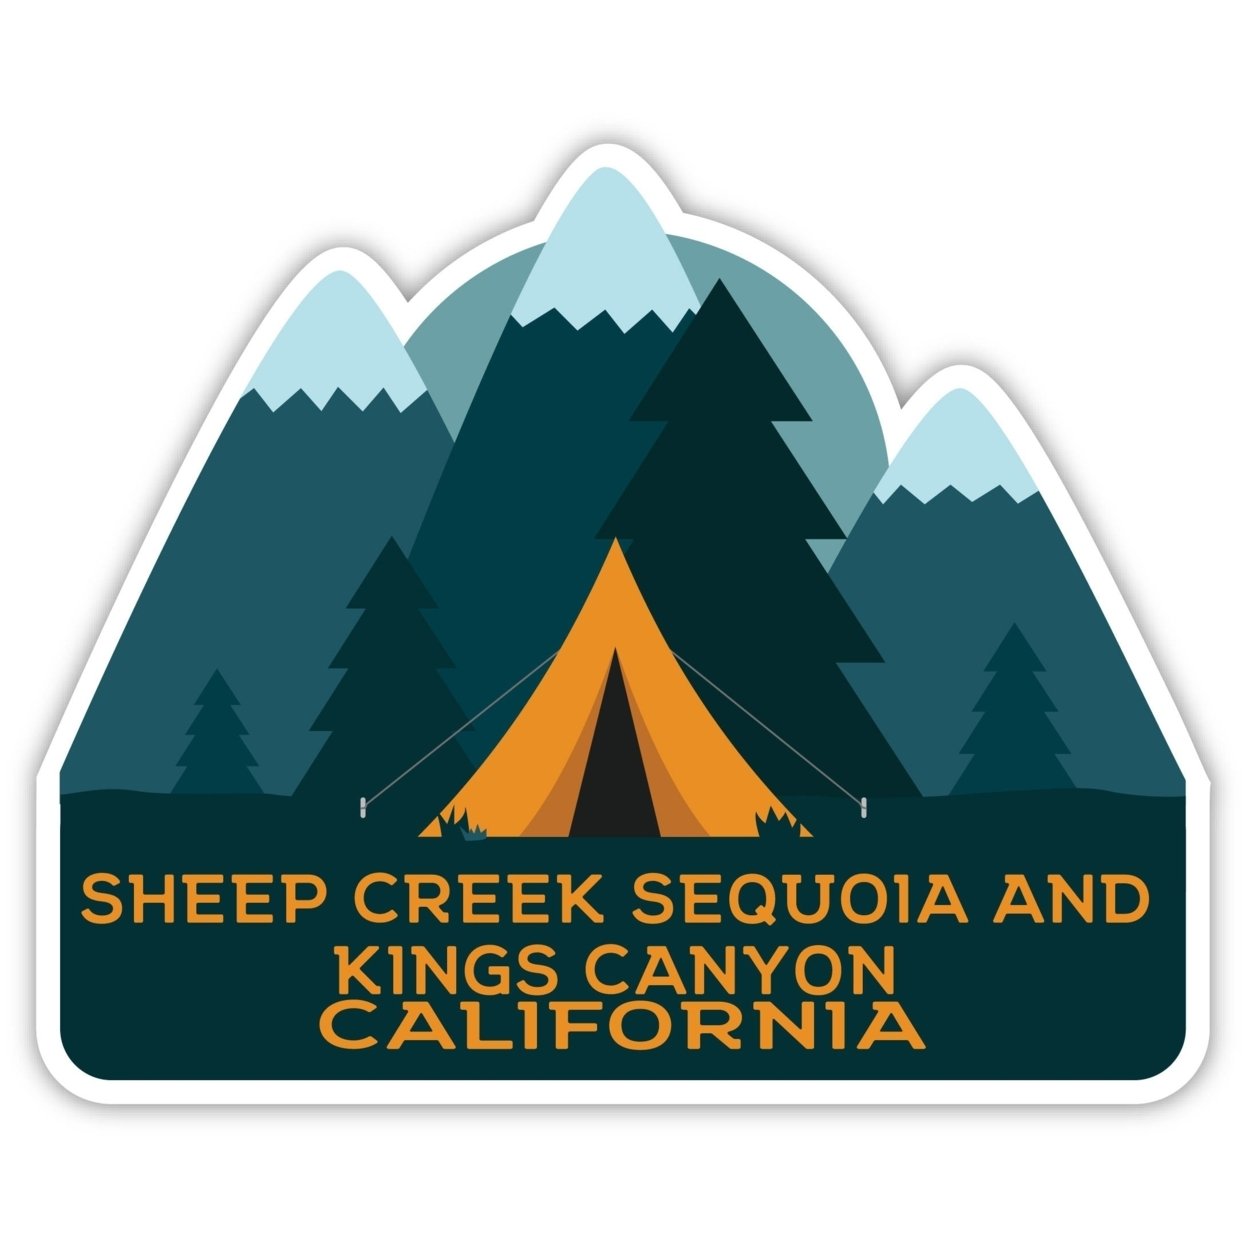 Sheep Creek Sequoia And Kings Canyon California Souvenir Decorative Stickers (Choose Theme And Size) - Single Unit, 2-Inch, Tent